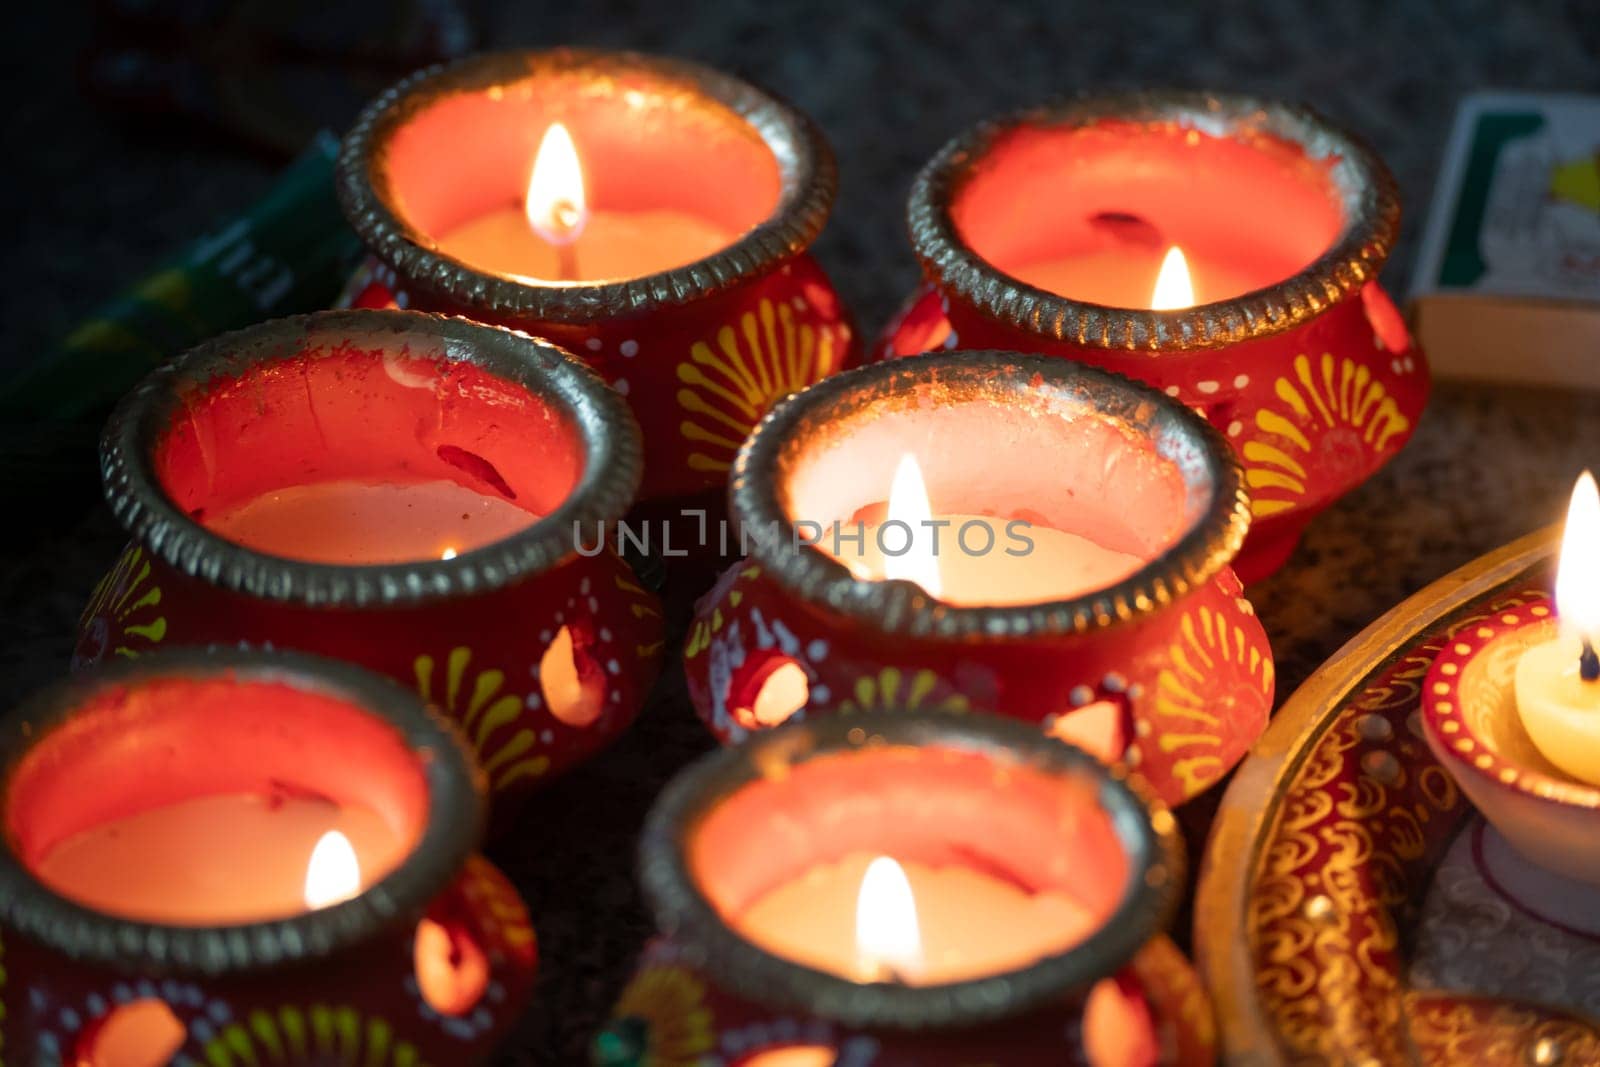 beautifully decorated diyas lit on the eve of diwali and the Ram temple Pran Pratishtha consecration celebrated across India and globally by Shalinimathur